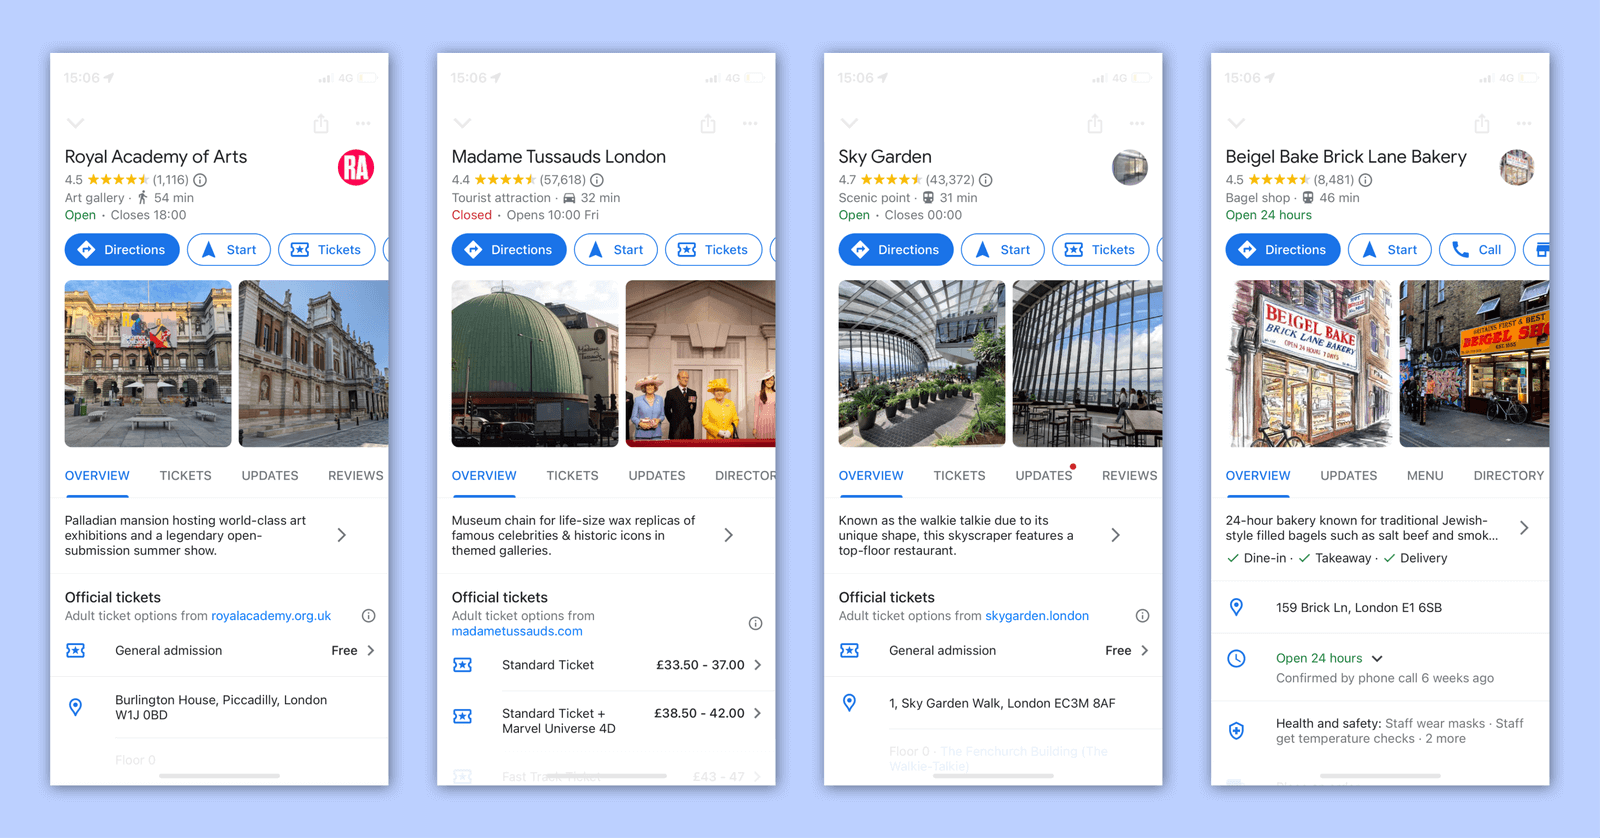 The Google Business Profiles for popular locations in London.